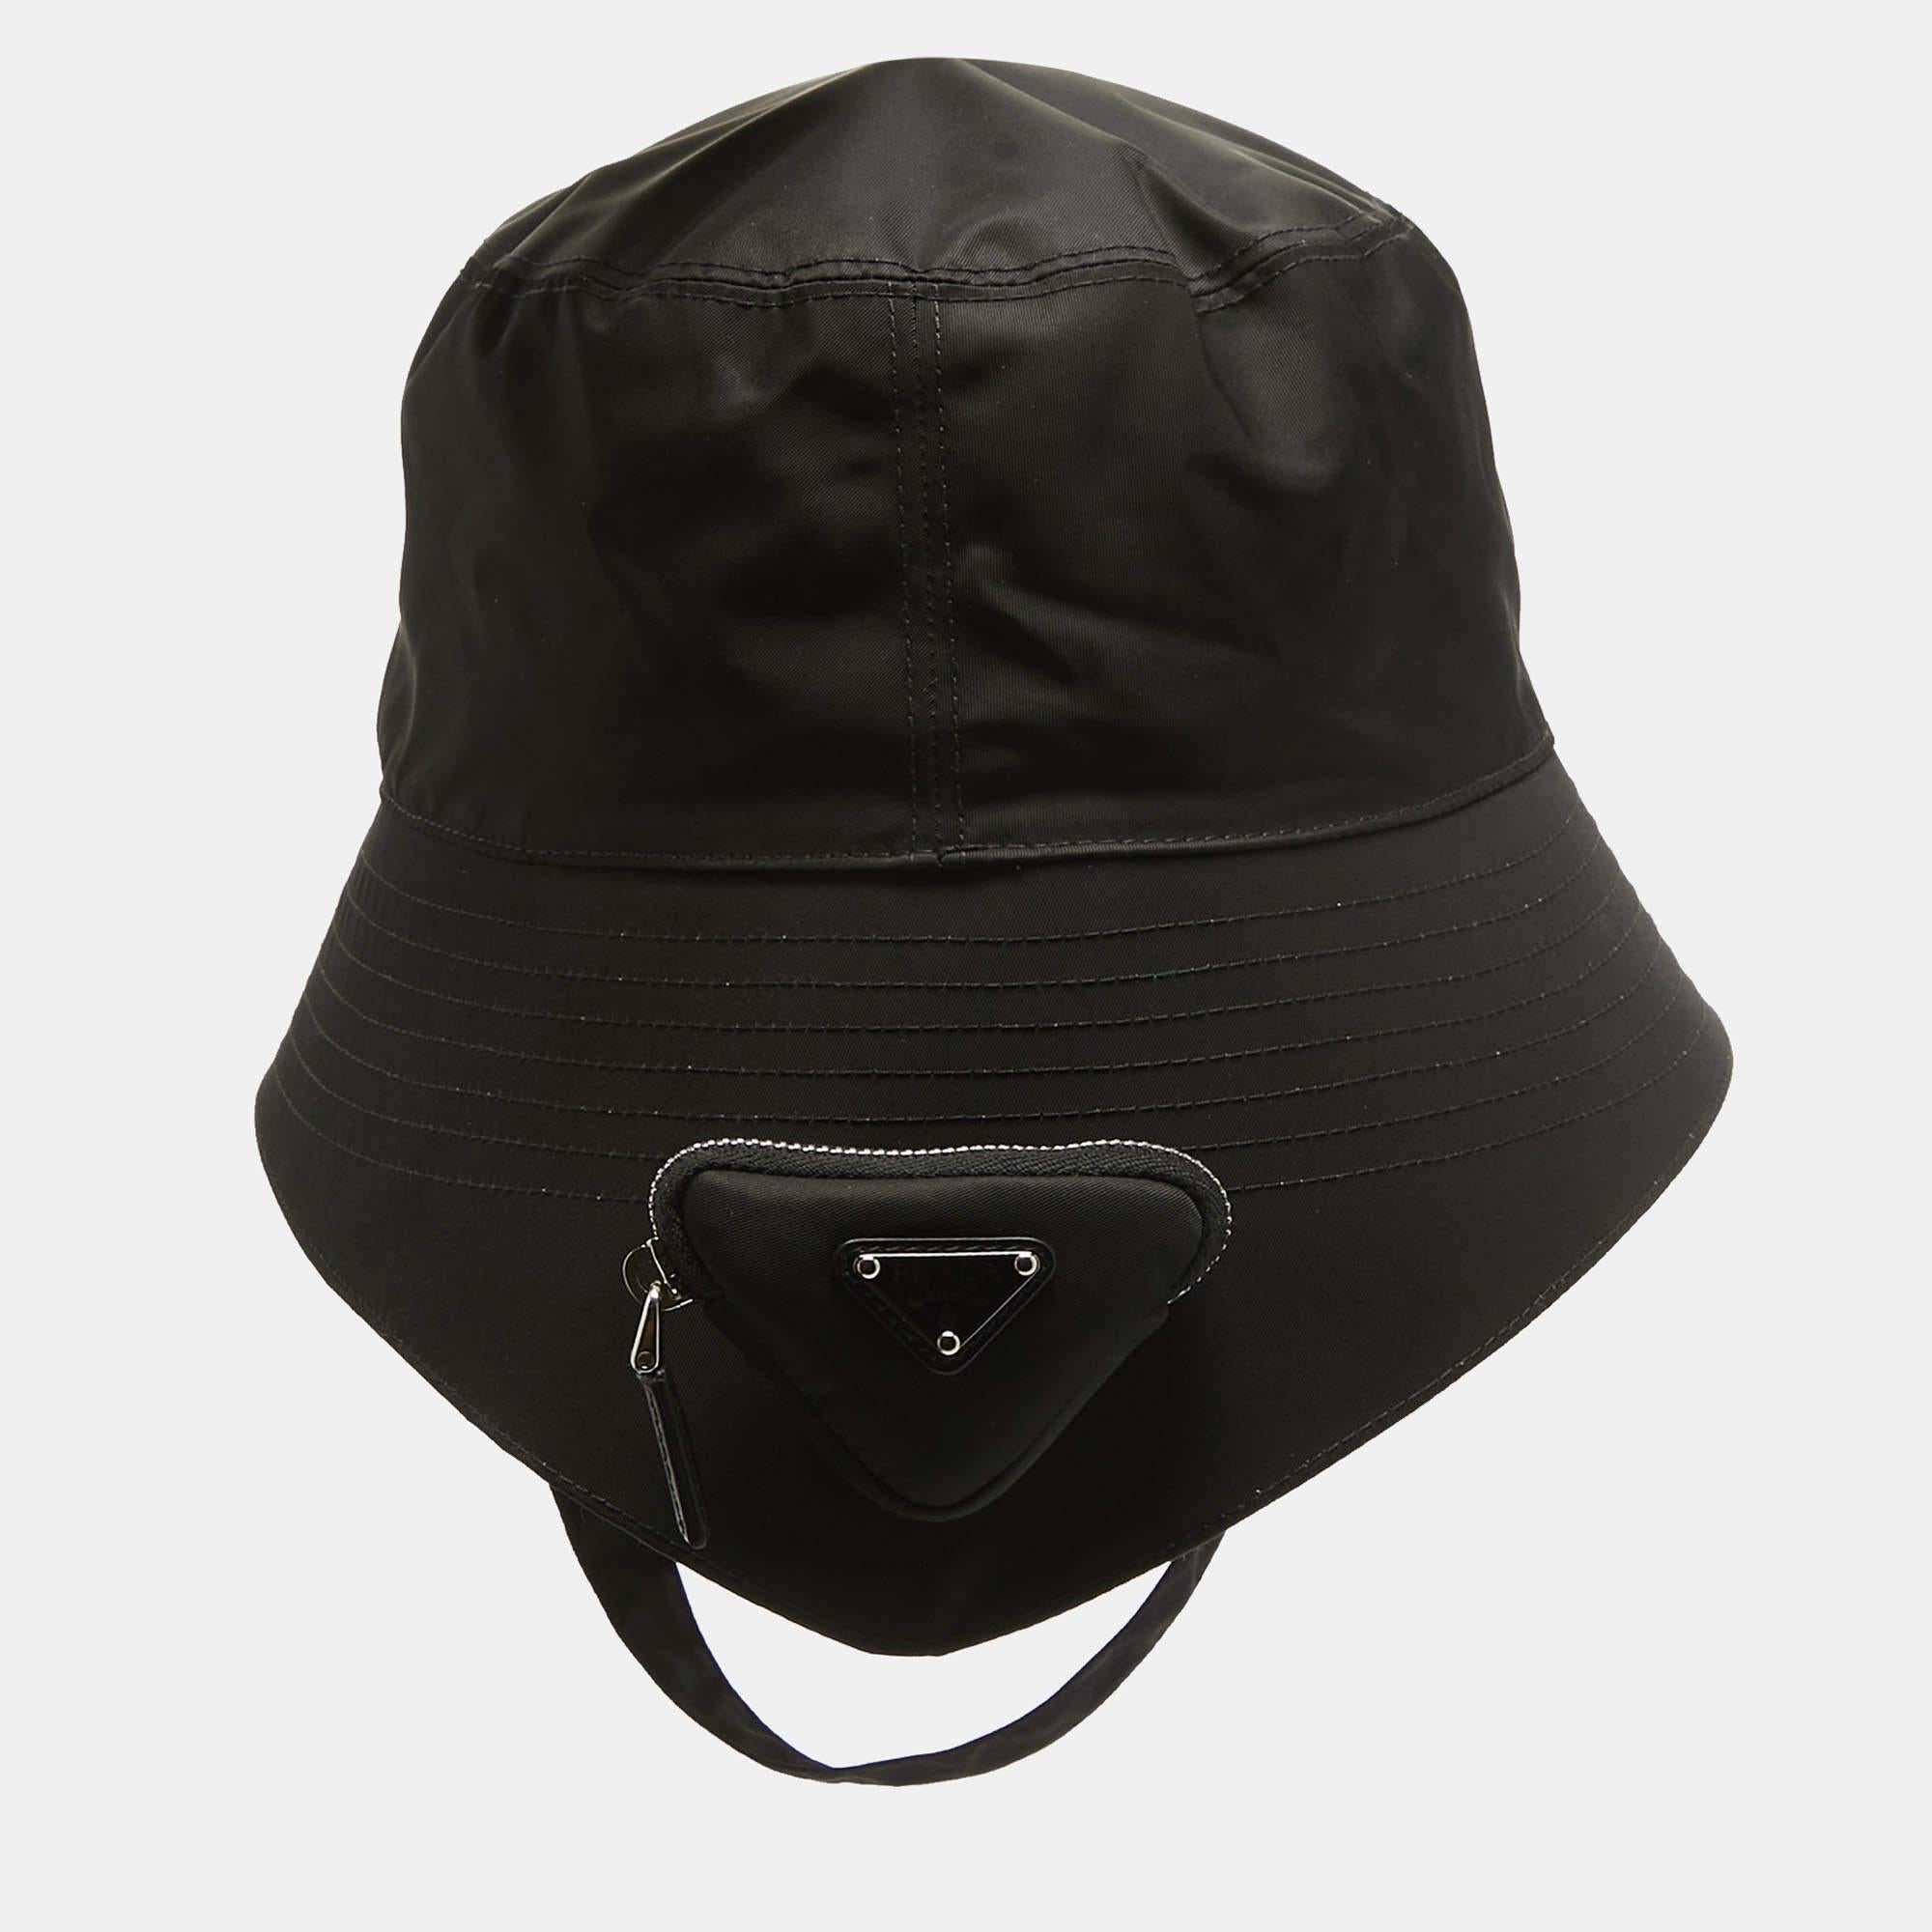 The Prada bucket hat has a classic appeal, and this fashion accessory will fit well in your casual wardrobe. Crafted from ethically sourced re-nylon, the hat is accented with a brand logo on the front.

